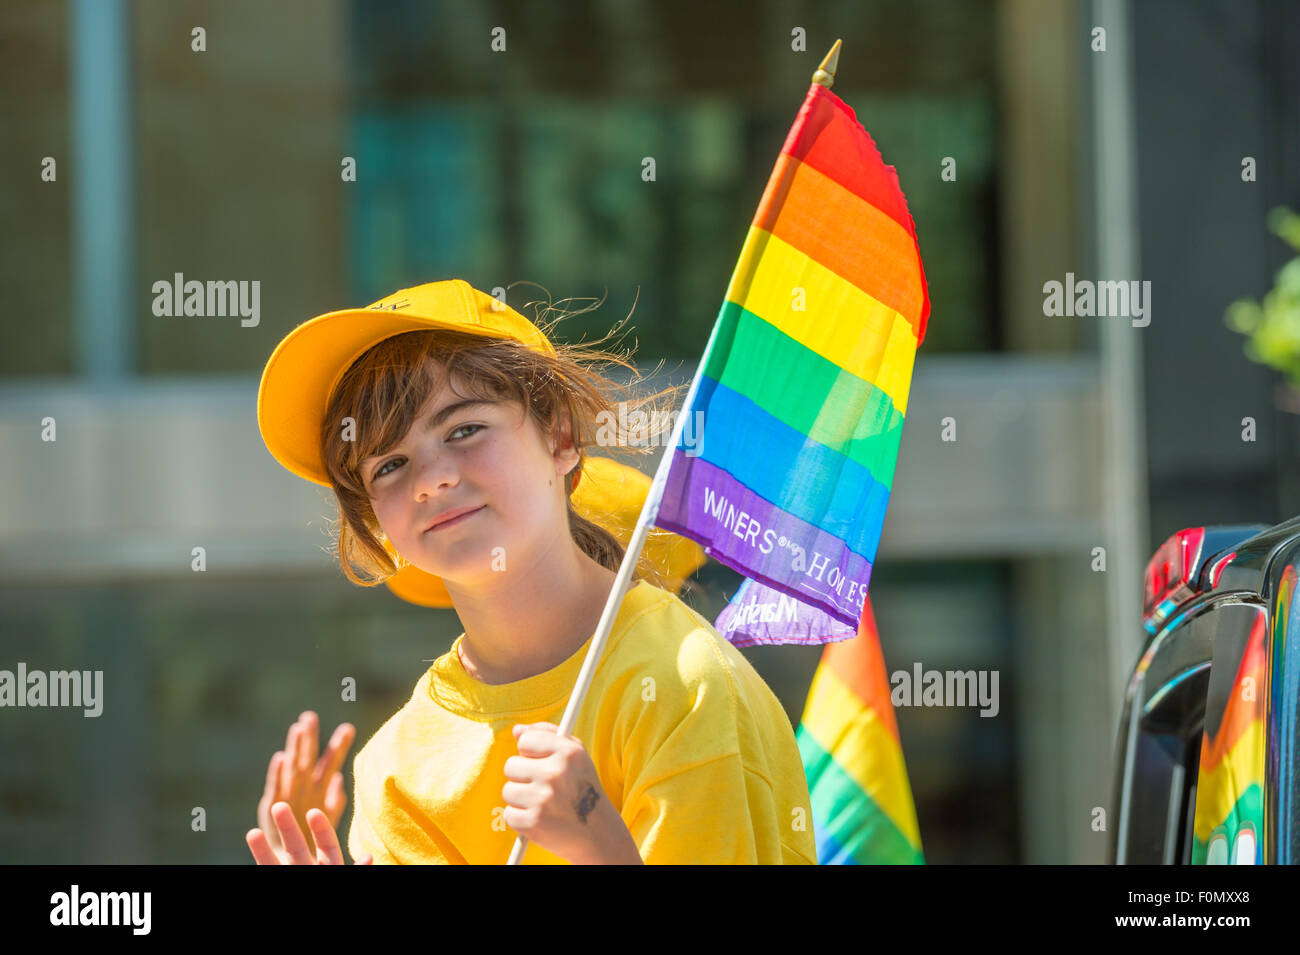 MONTREAL, CANADA, 16th August 2015. A young girl on a parade truck is smiling at the camera at the 2015 Gay Pride Parade in Montreal. © Marc Bruxelle/Alamy Live News Stock Photo